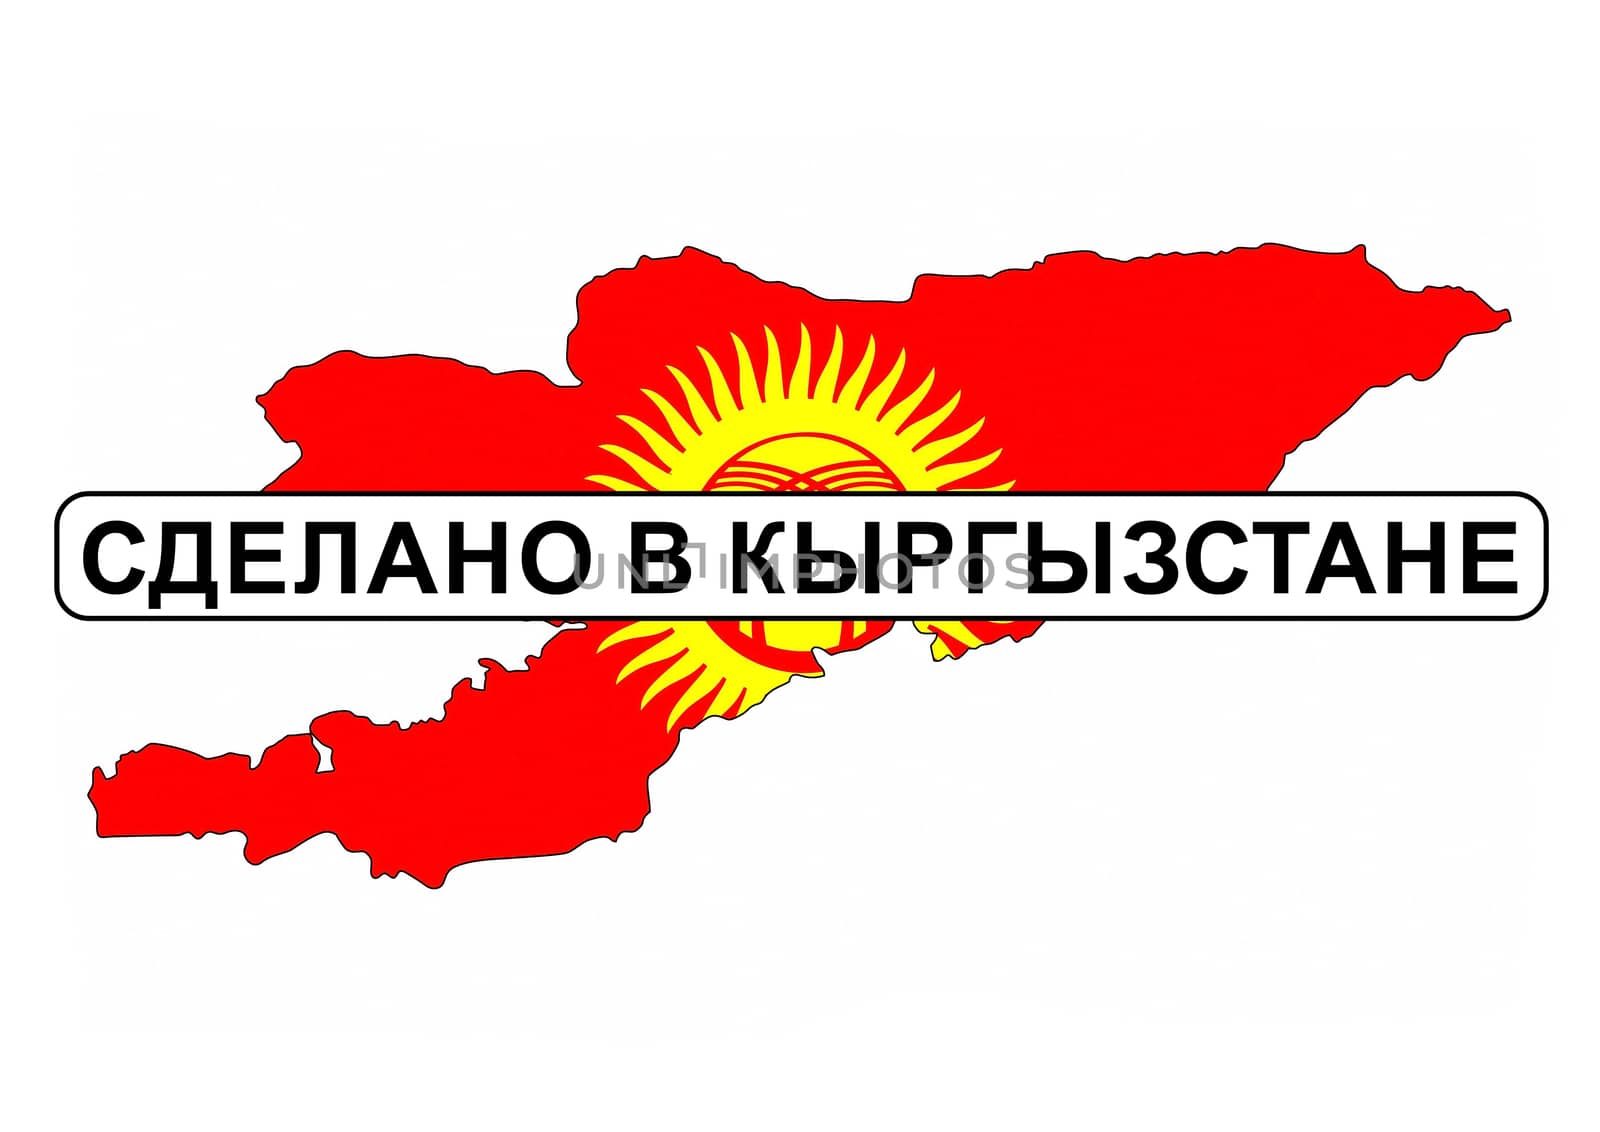 made in kyrgyzstan country national flag map shape with text